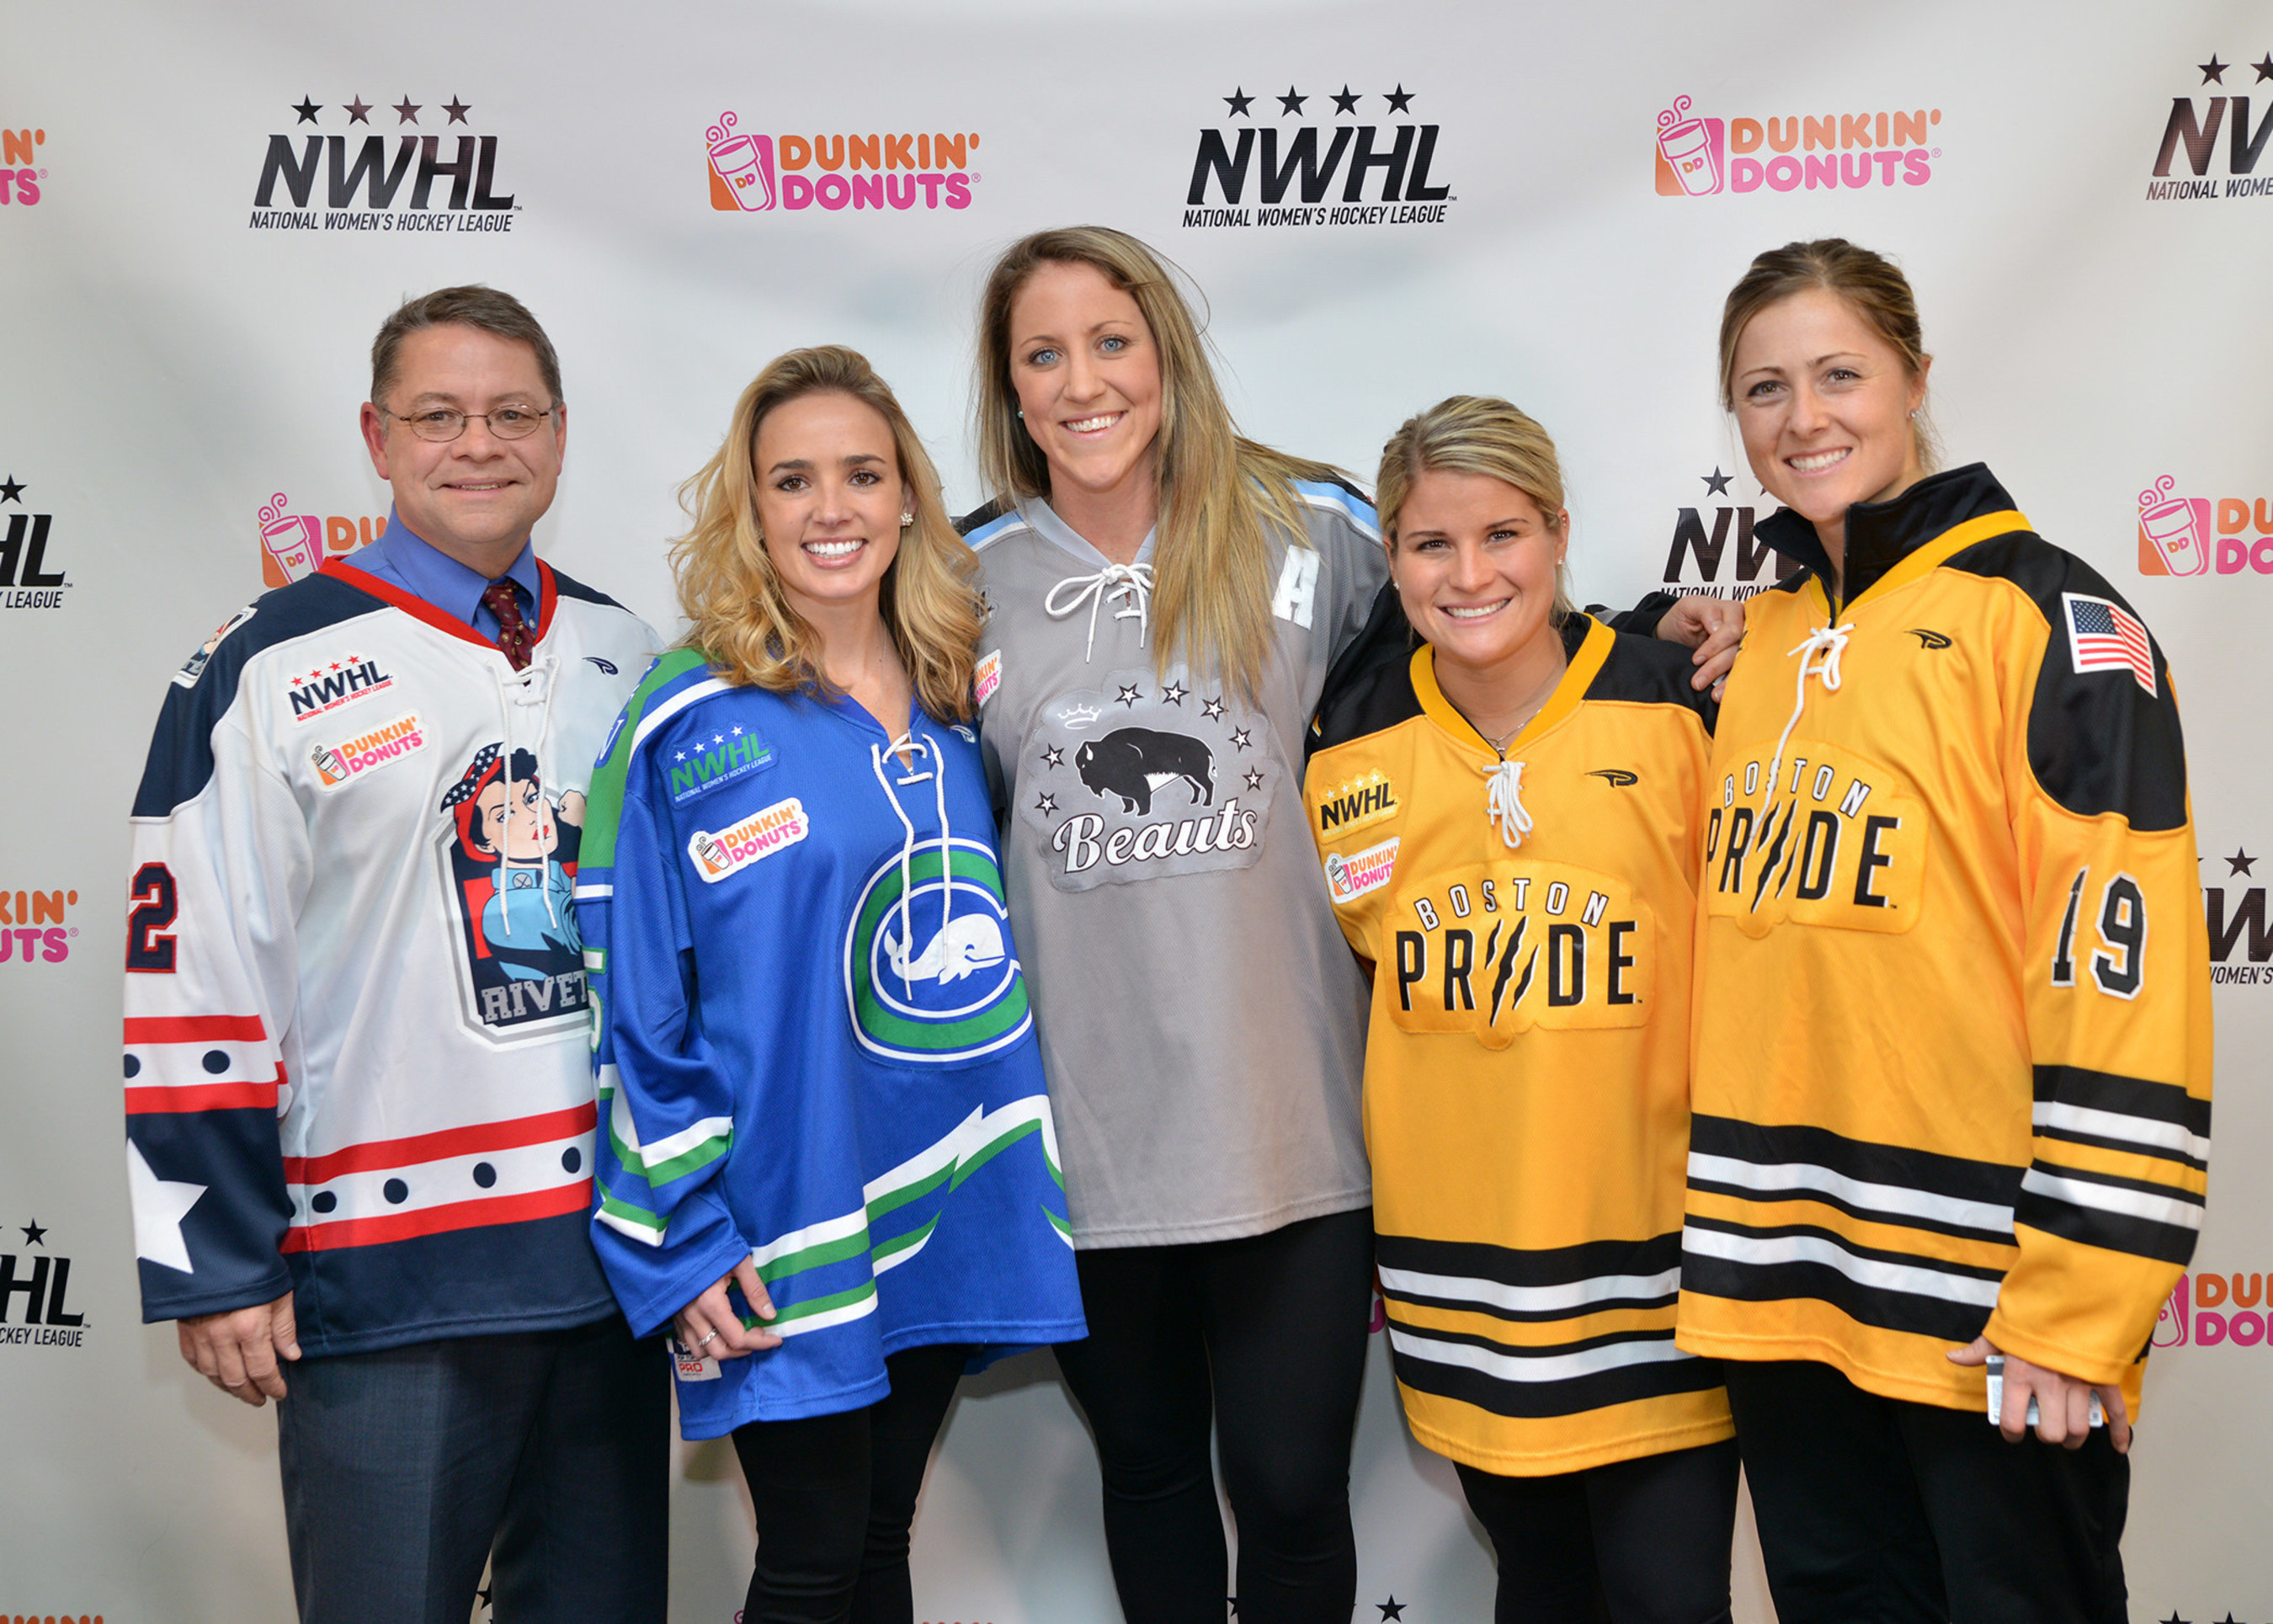 Women's hockey league that includes the Boston Pride has been sold